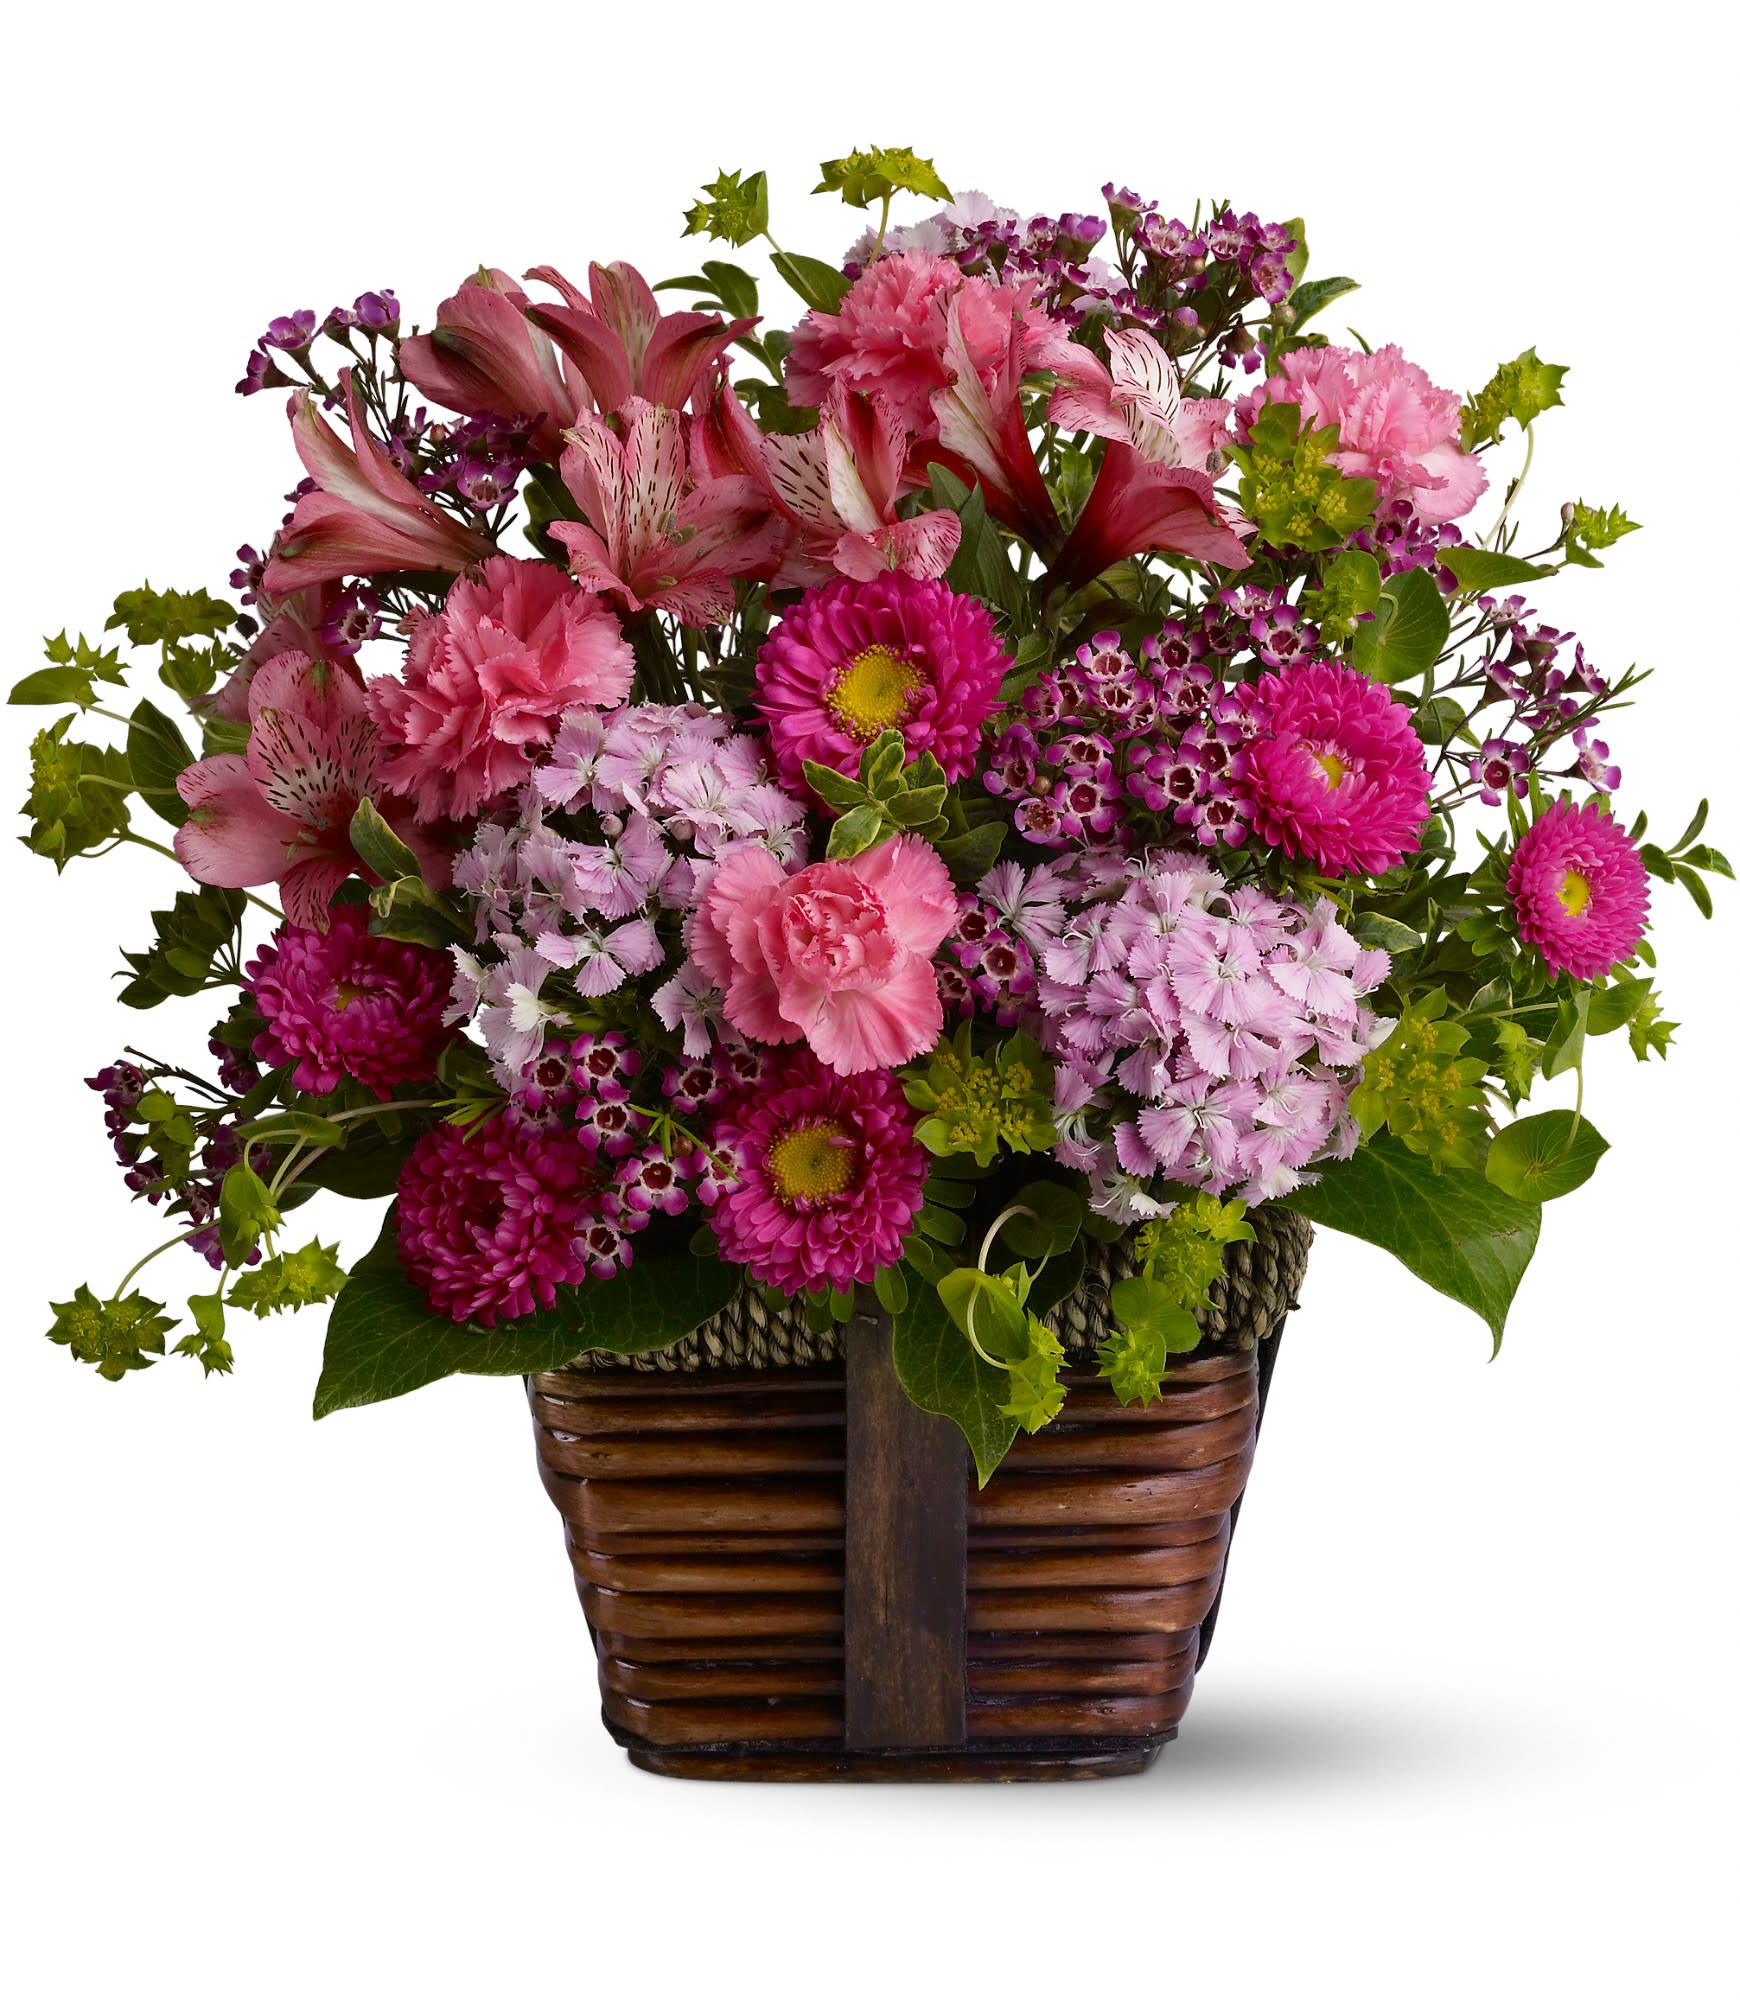 Happily Ever After by Teleflora - Send someone this delightful floral gift of pretty pink blossoms and share the gift of beauty! A glorious selection of fresh flowers is arranged in a rustic basket, then hand-delivered. What could be lovelier?